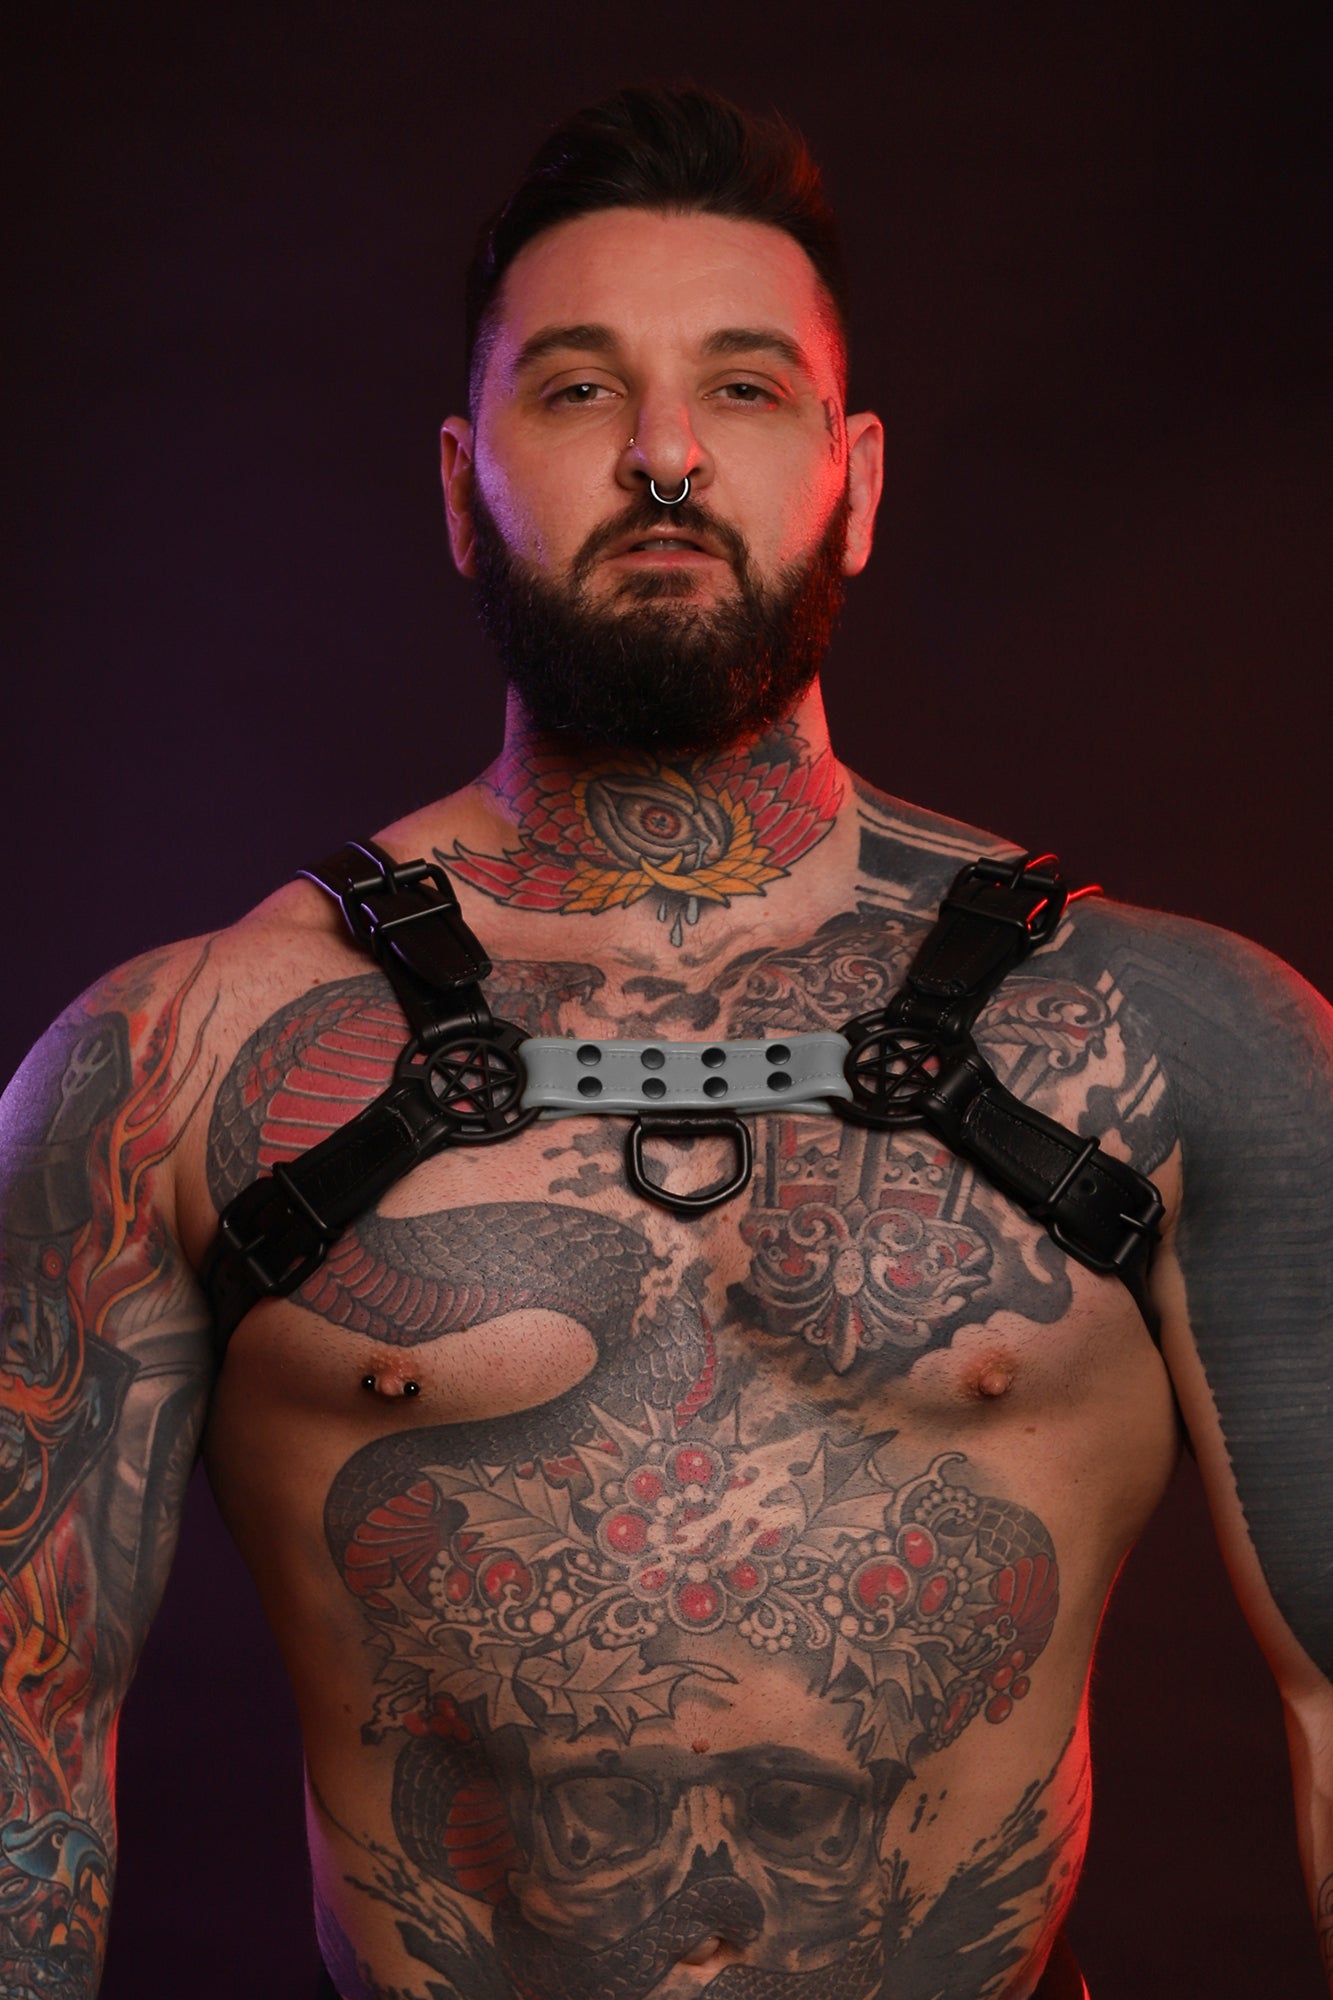 A product photo of a grey Beast Harness by Twisted Beast.